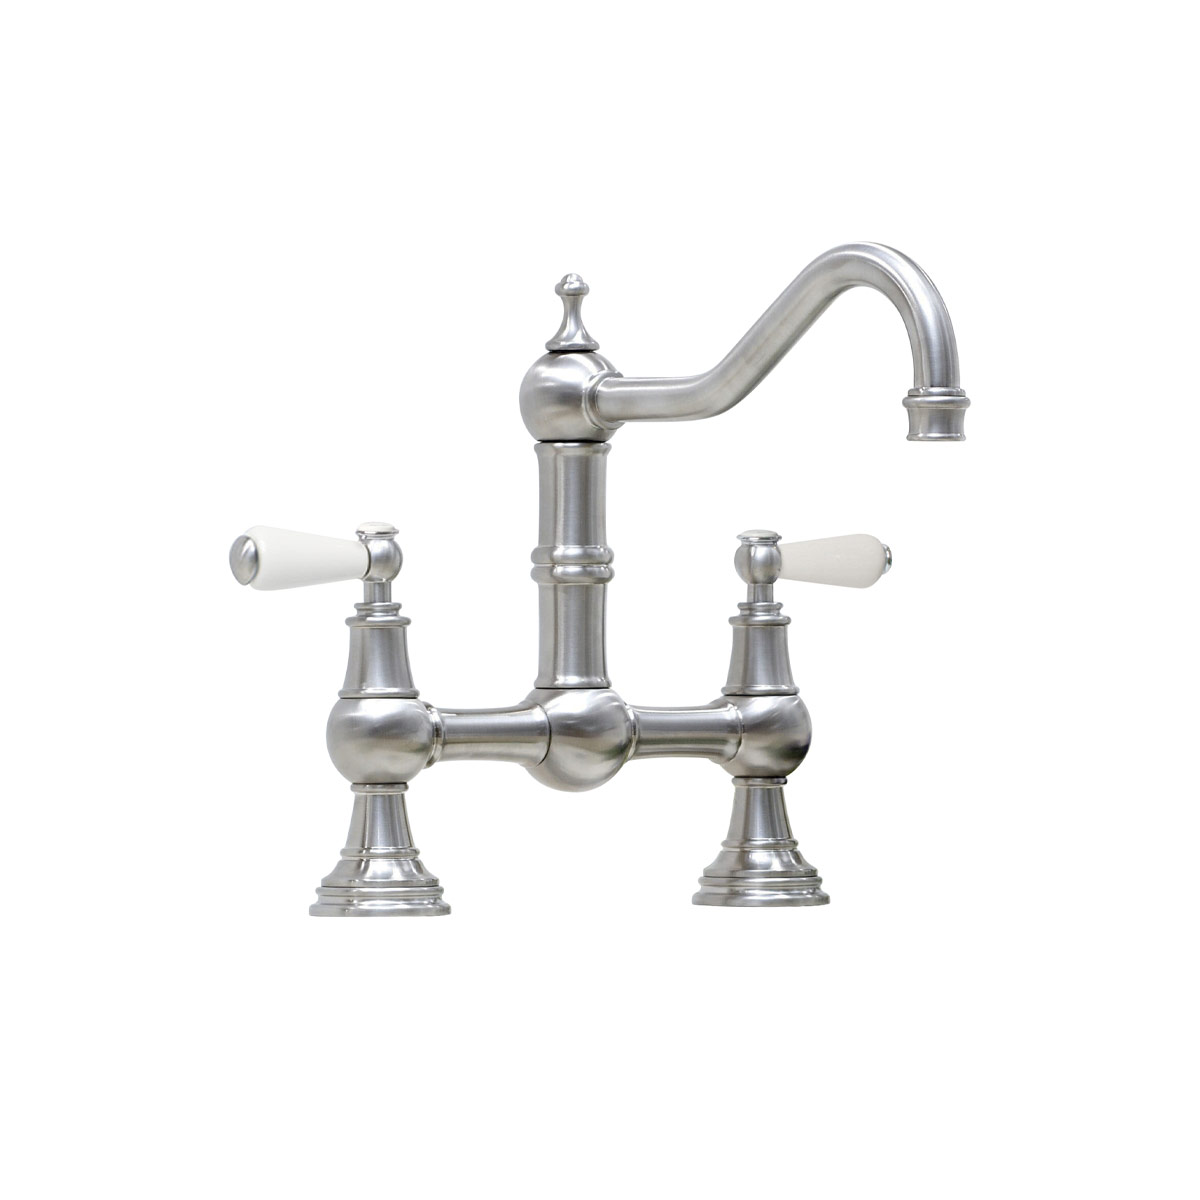 Shaws by Perrin & Rowe Hambleton French bridge mixer in Pewter. Provence style kitchen tap AUSH.4751. Distributed in Australia by Luxe by Design, Brisbane.